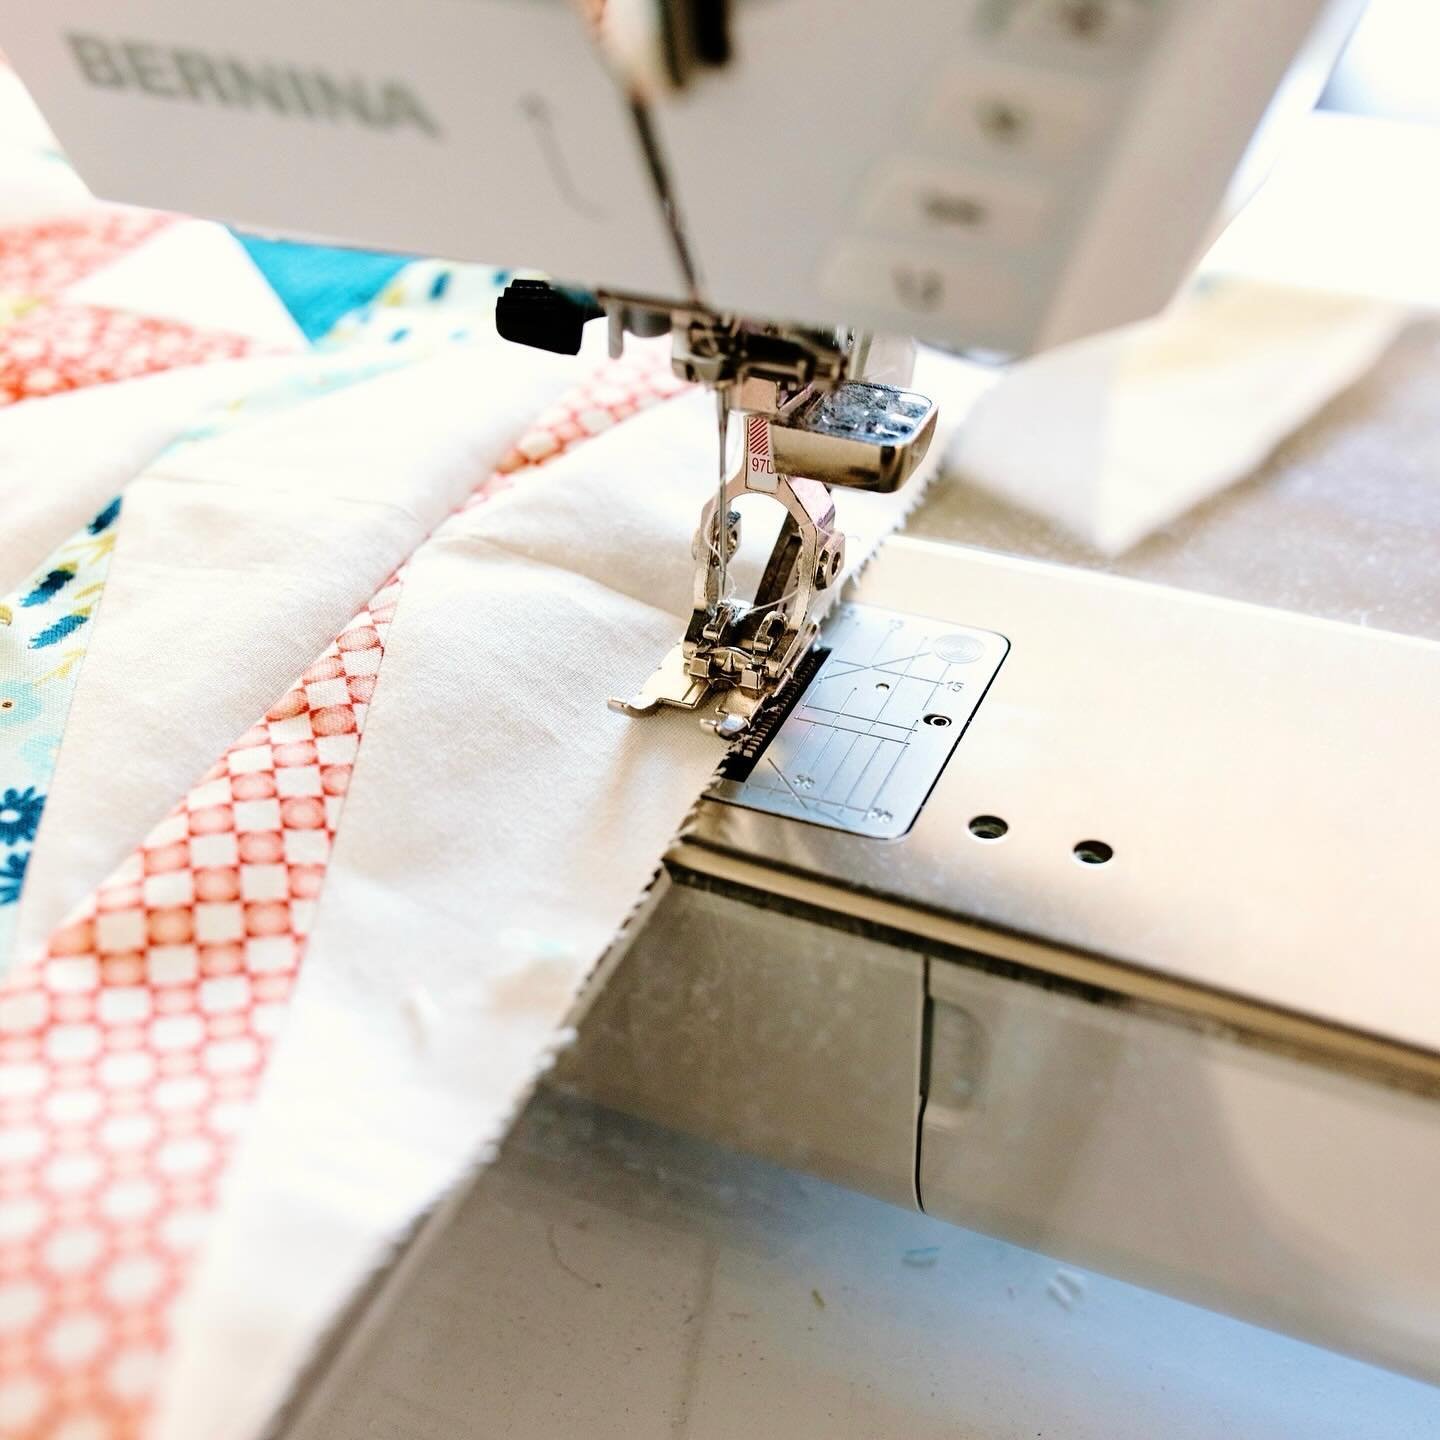 🎉 Victory Lap Alert! 🎉 Ever heard of it?
⠀⠀⠀⠀⠀⠀⠀⠀⠀
The term &ldquo;victory lap&rdquo; refers to placing a 1/8 inch stay stitch around the perimeter of your quilt once the top is complete. This technique helps to keep those edge seams nice and tight